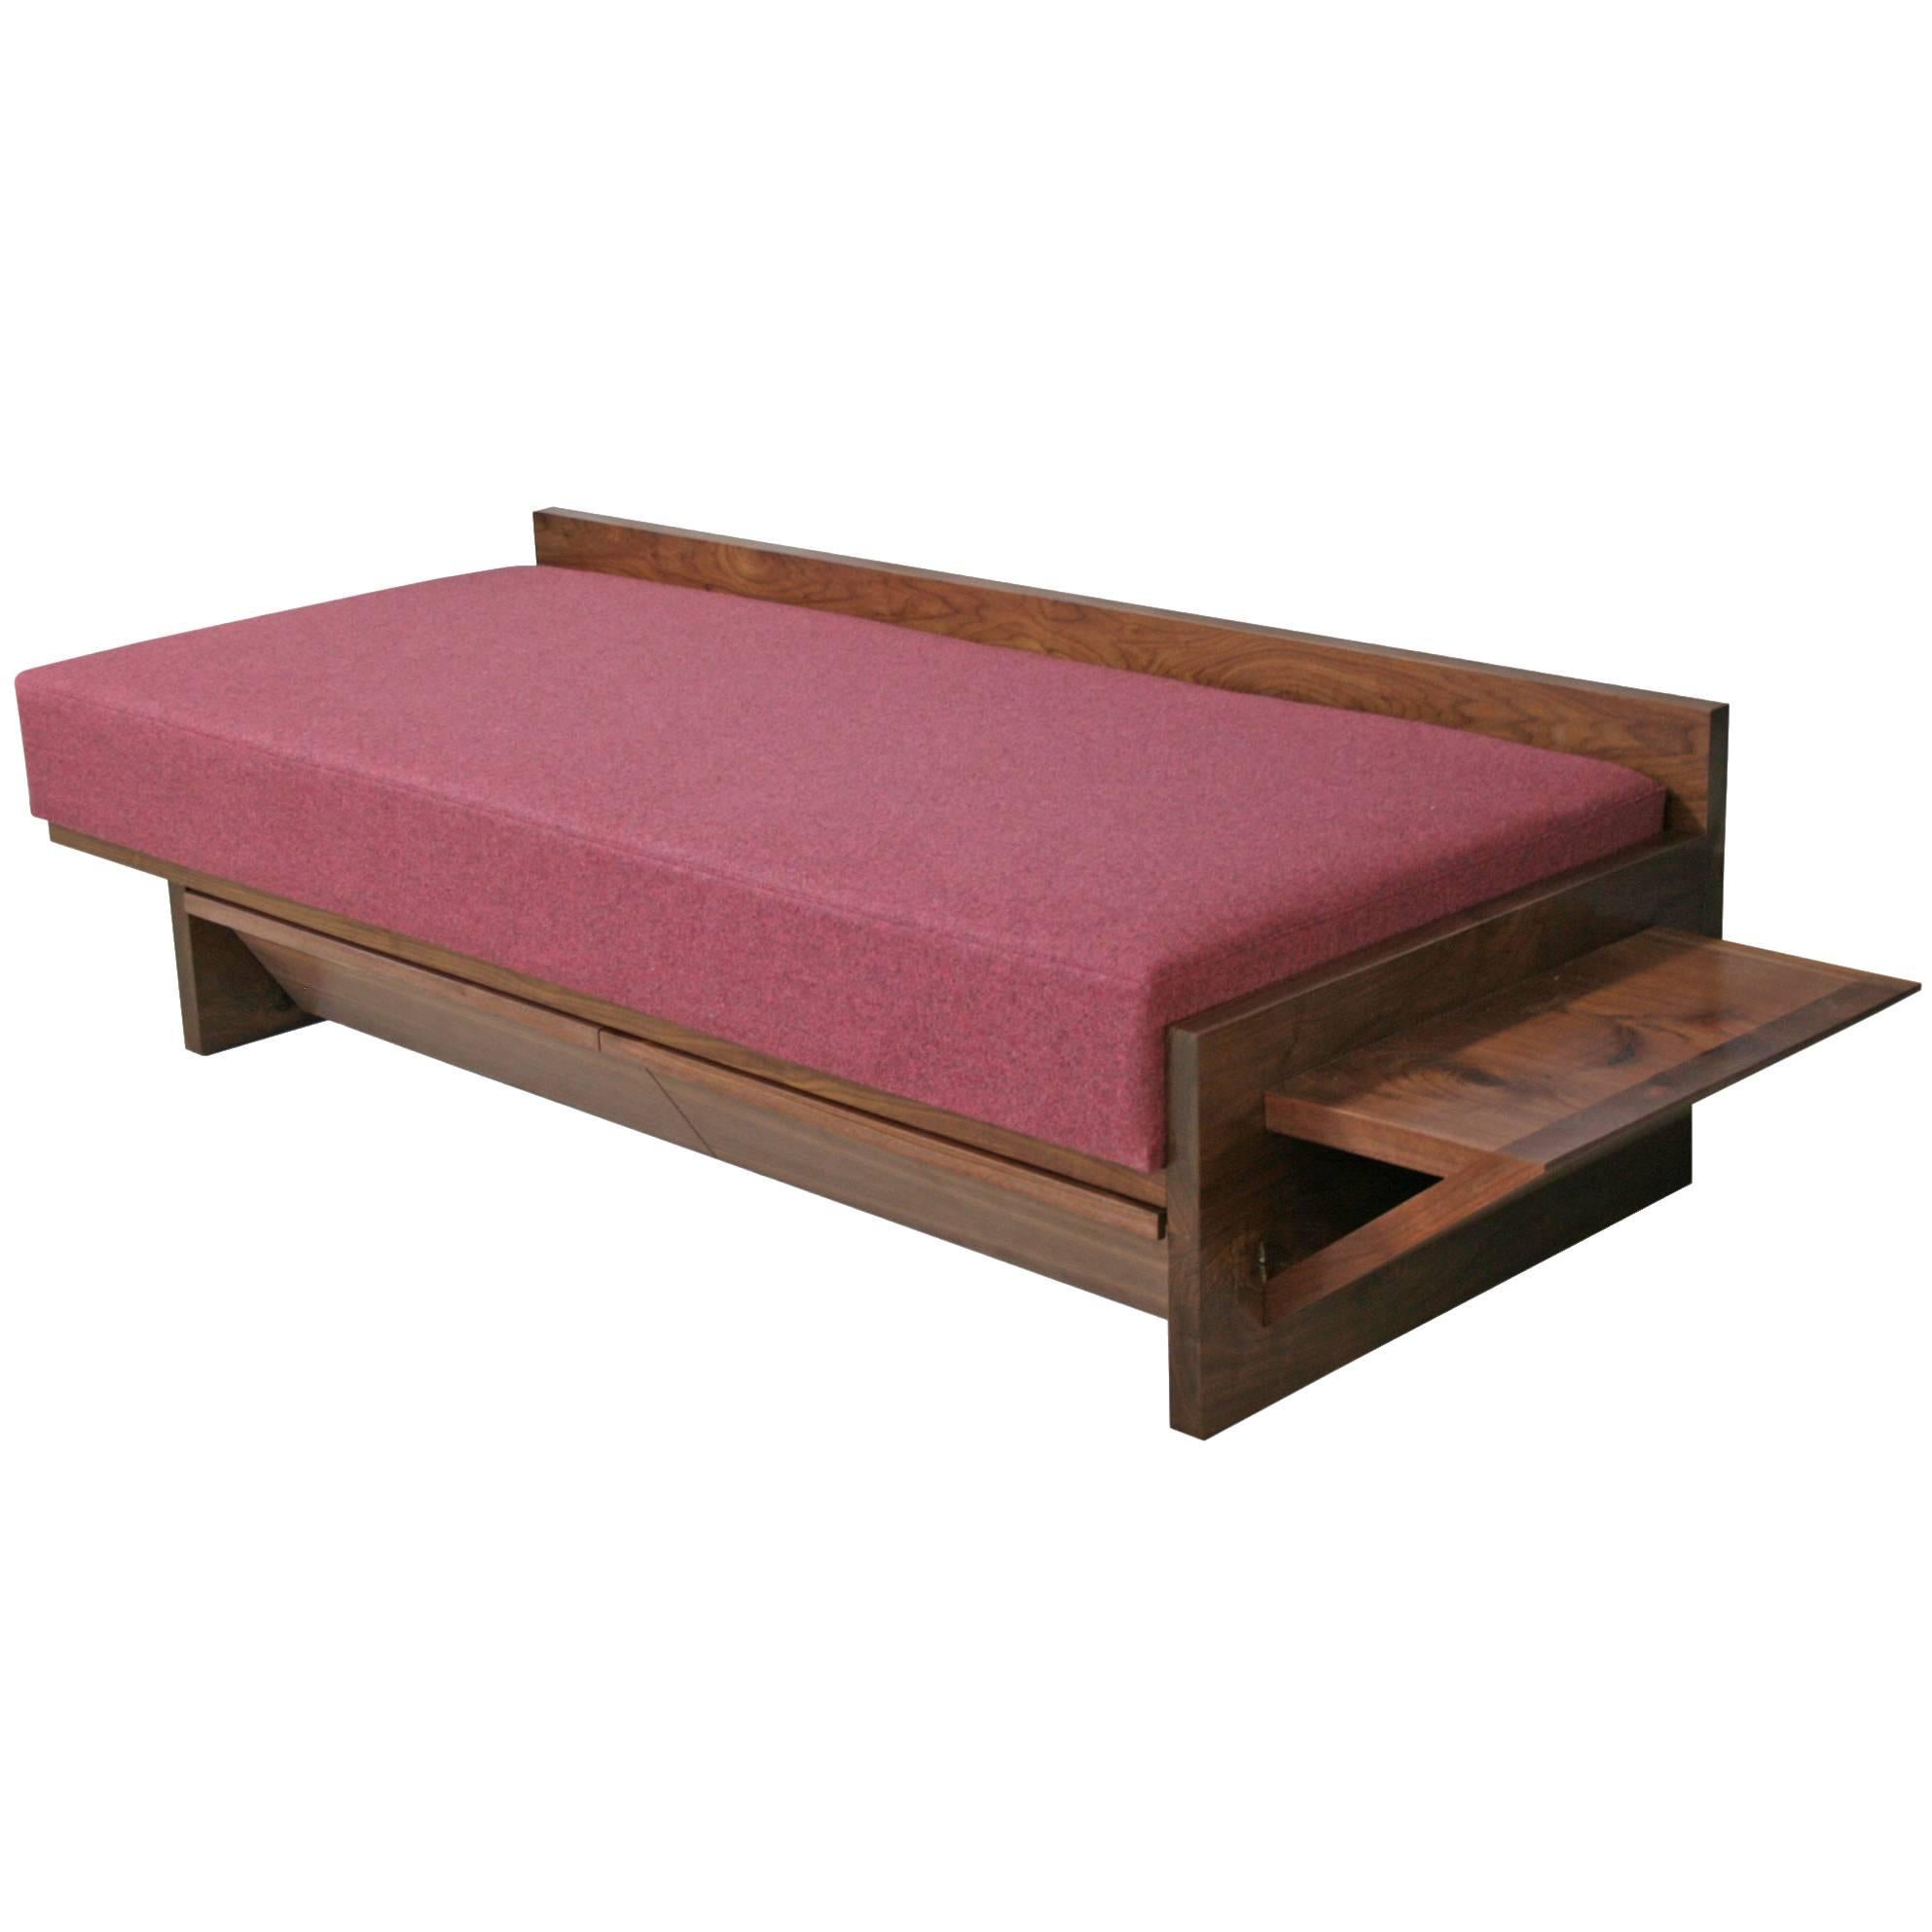 Shimna Lagan Daybed with Hidden Storage Drawers For Sale